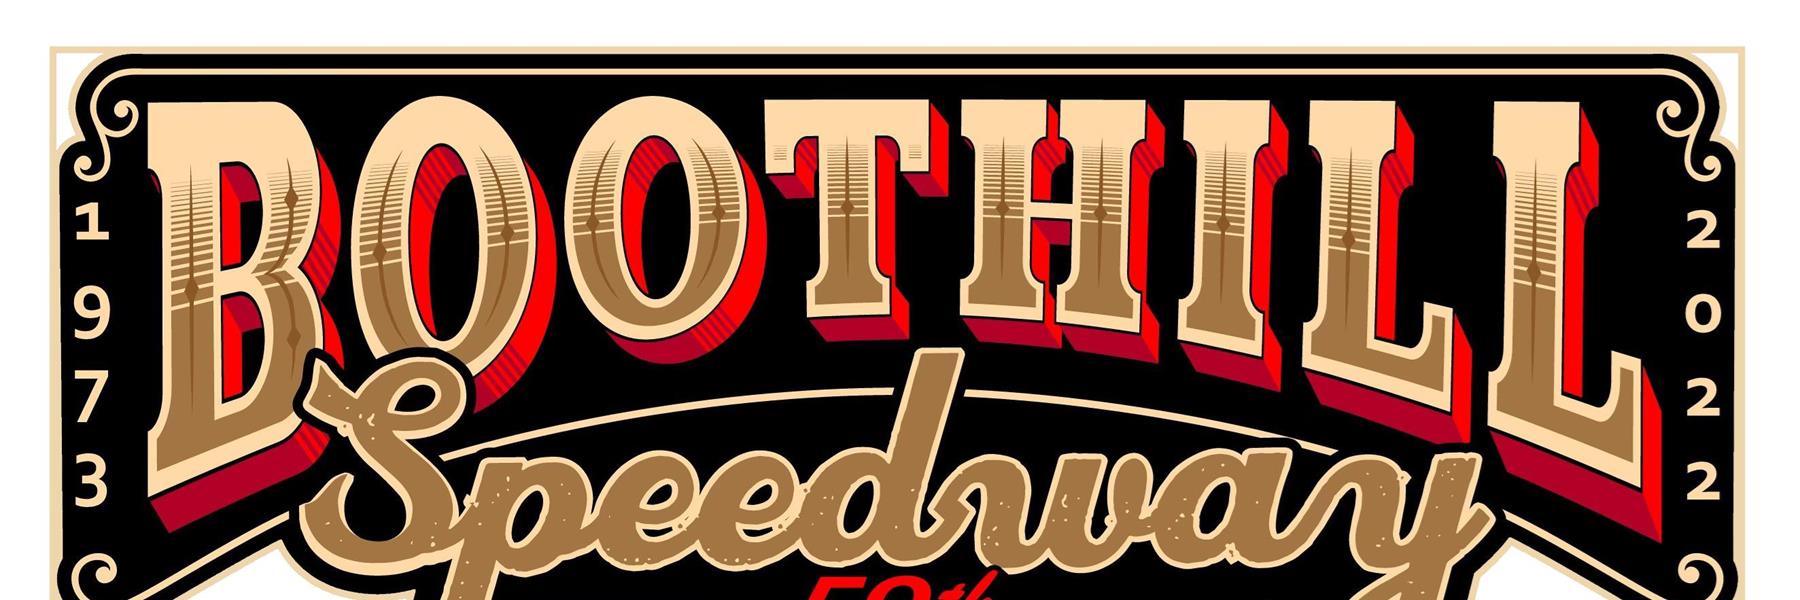 3/12/2021 - Boothill Speedway